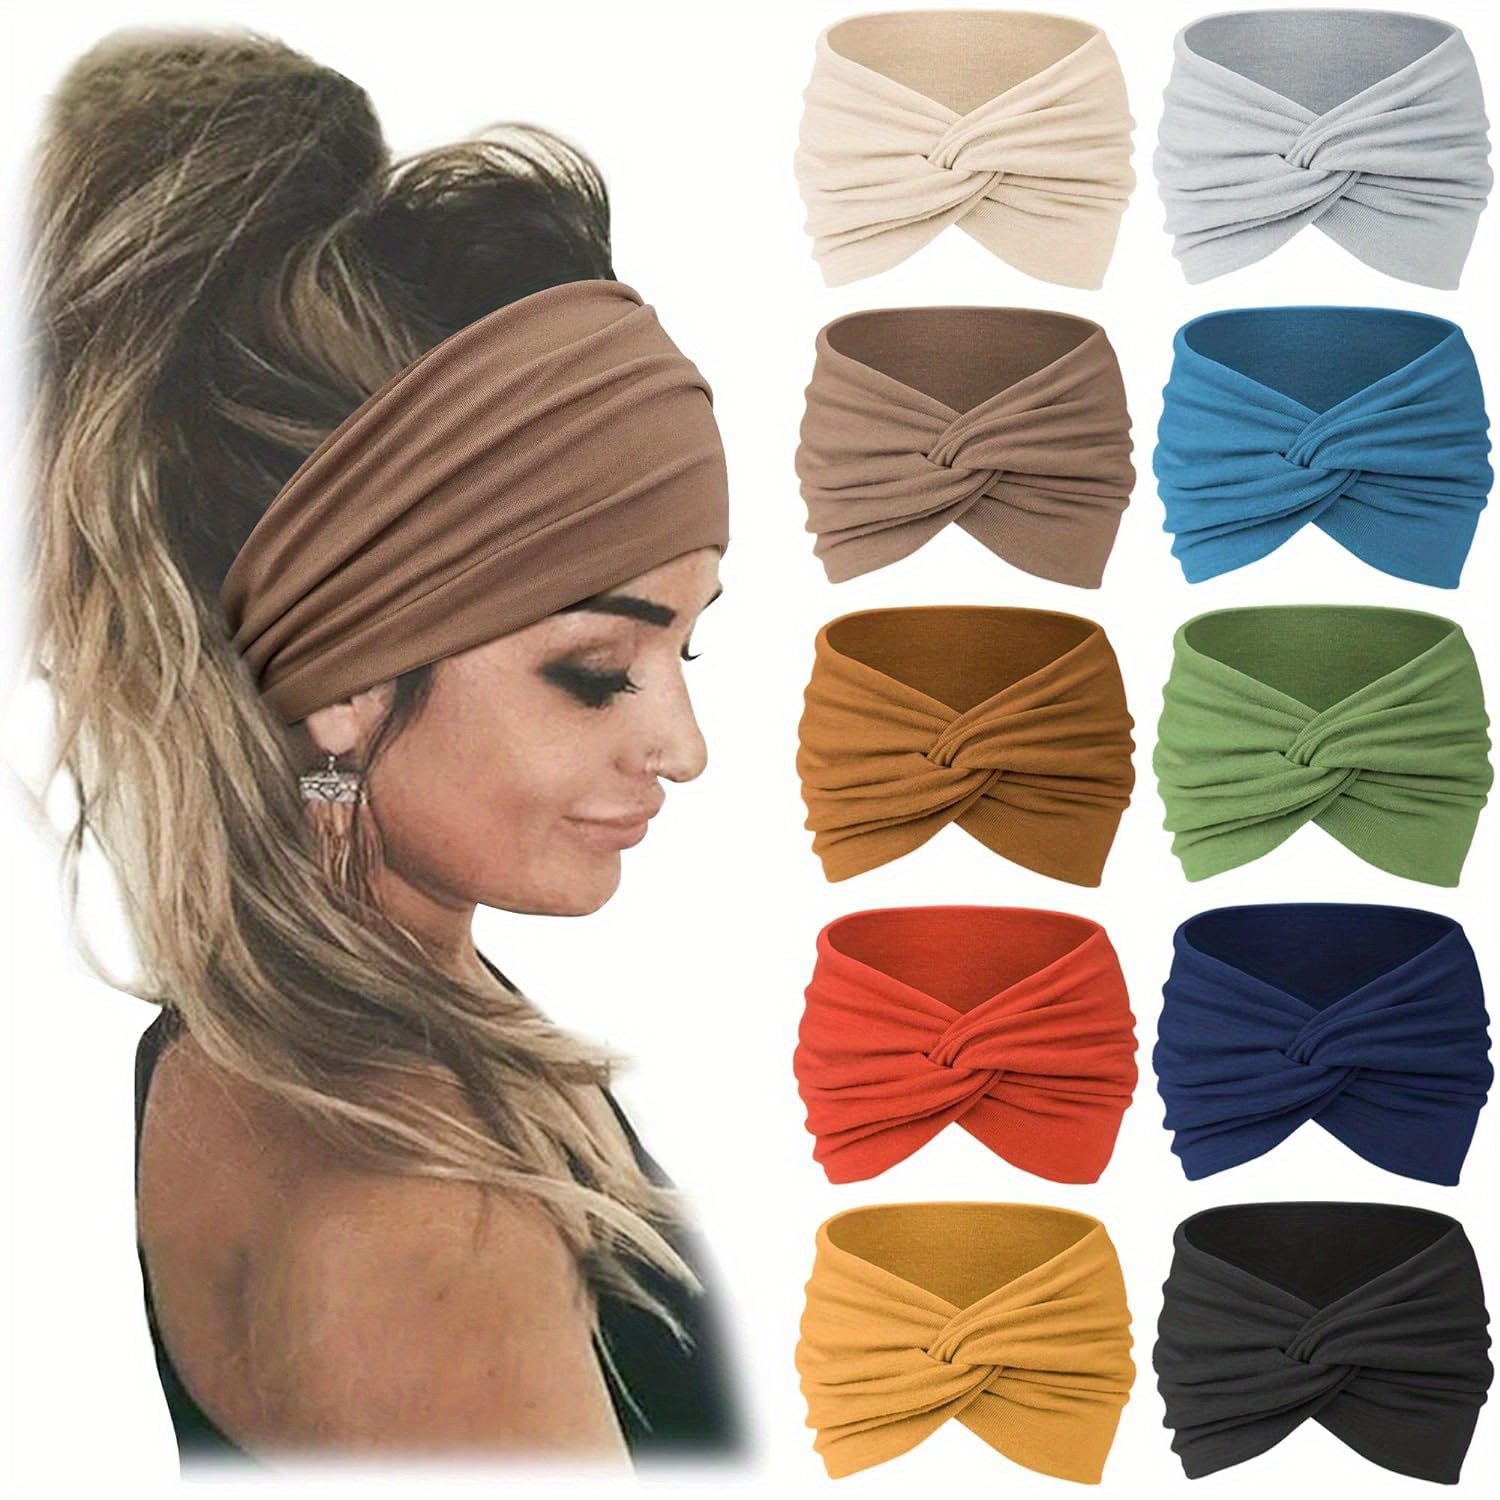 

10pcs Women Headbands African Wide Hair Wrap Extra Turban Head Bands For Lady Large Sport Workout Stretch Non-slip Big Hair Bands